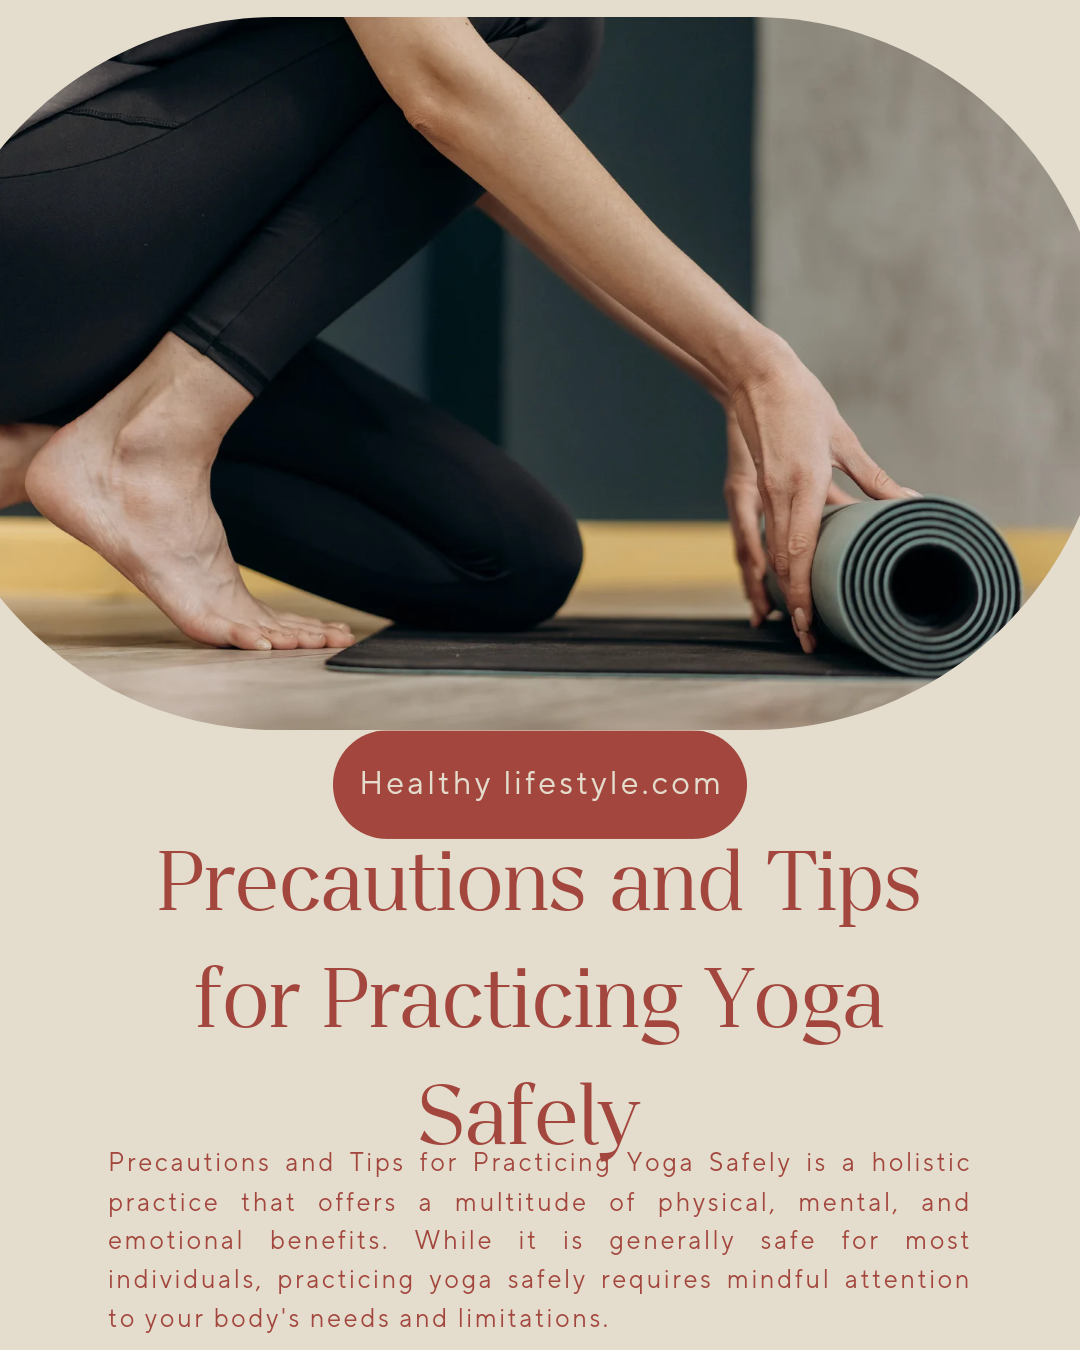 Precautions and Tips for Practicing Yoga Safely is a holistic practice that offers a multitude of physical, mental, and emotional benefits. While it is generally safe for most individuals, practicing yoga safely requires mindful attention to your body's needs and limitations.